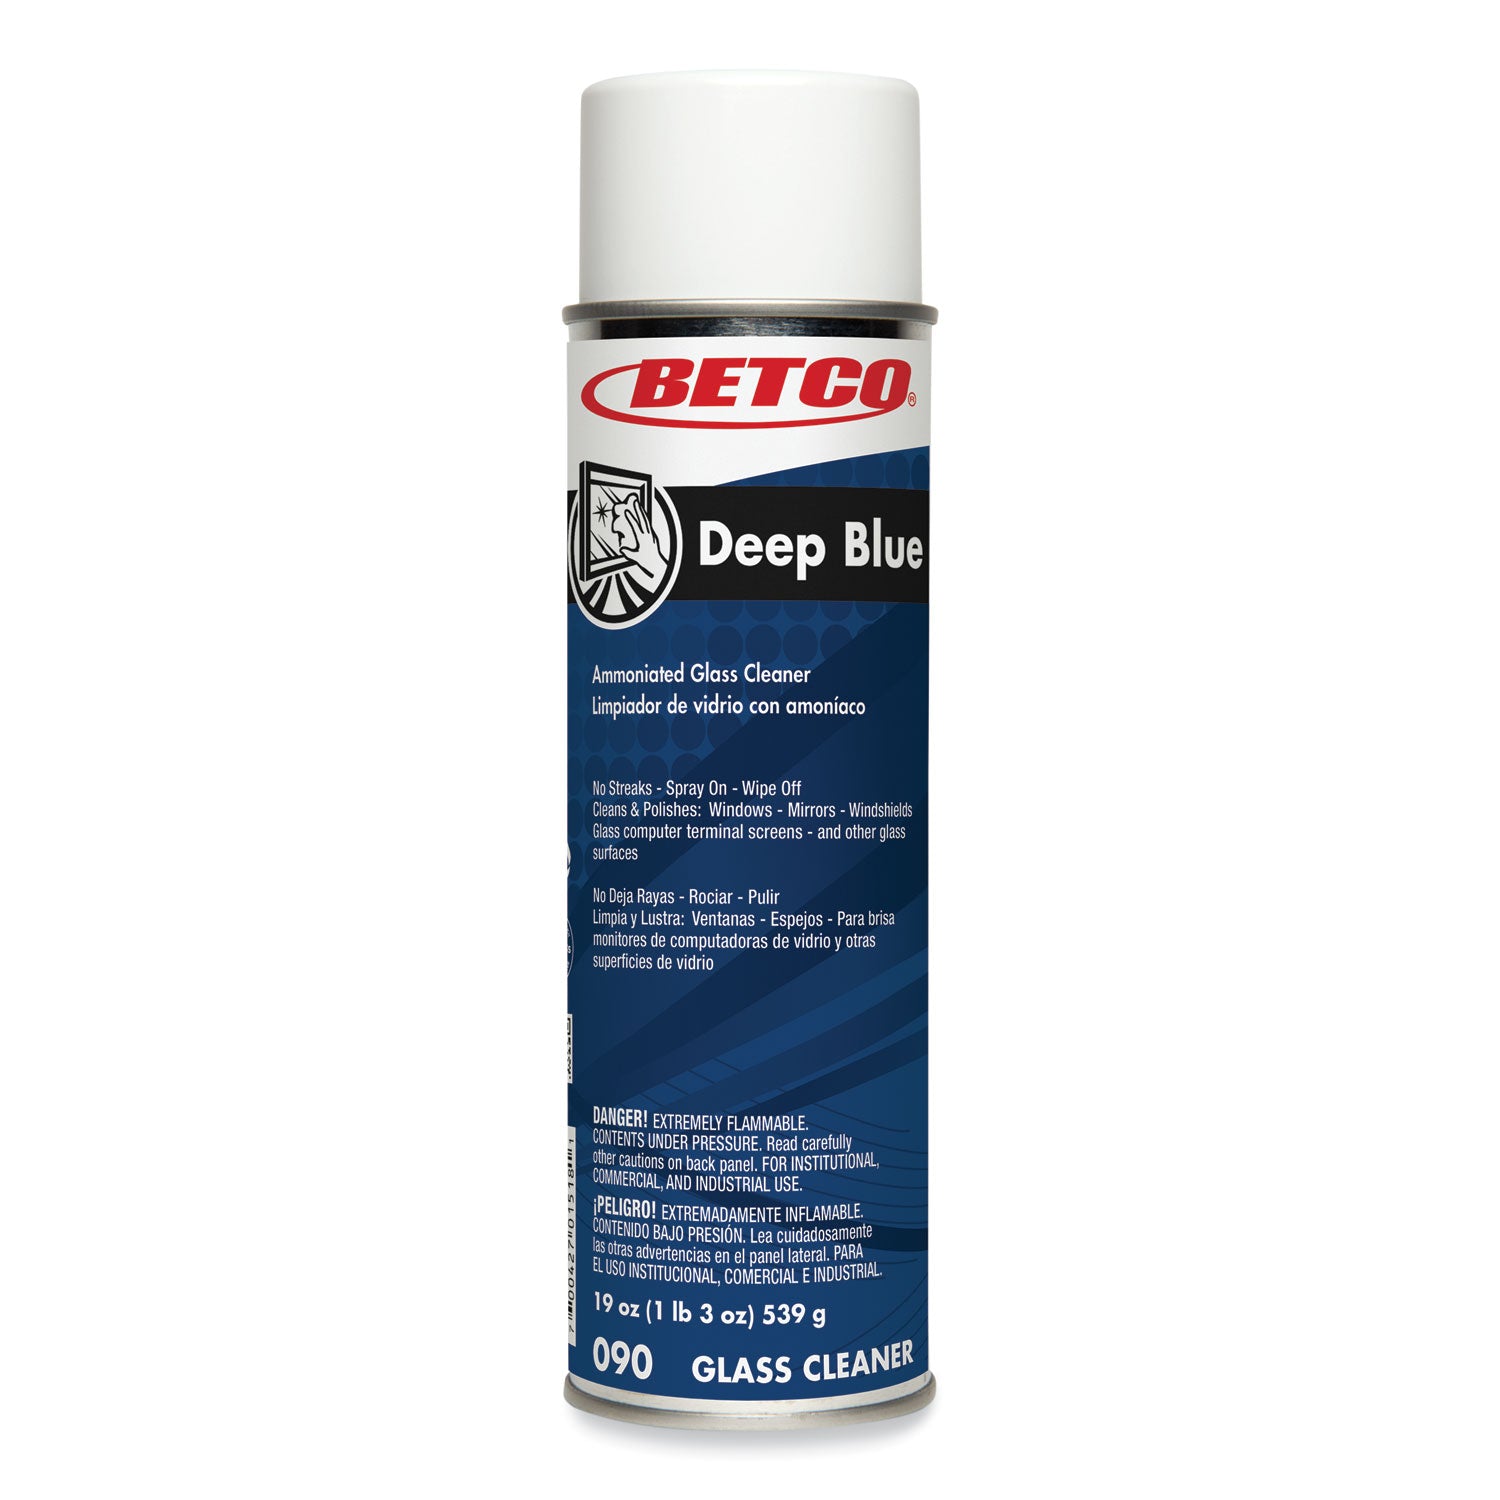 deep-blue-glass-and-surface-cleaner-characteristic-scent-19-oz-aerosol-can-12-carton_bet902300 - 1